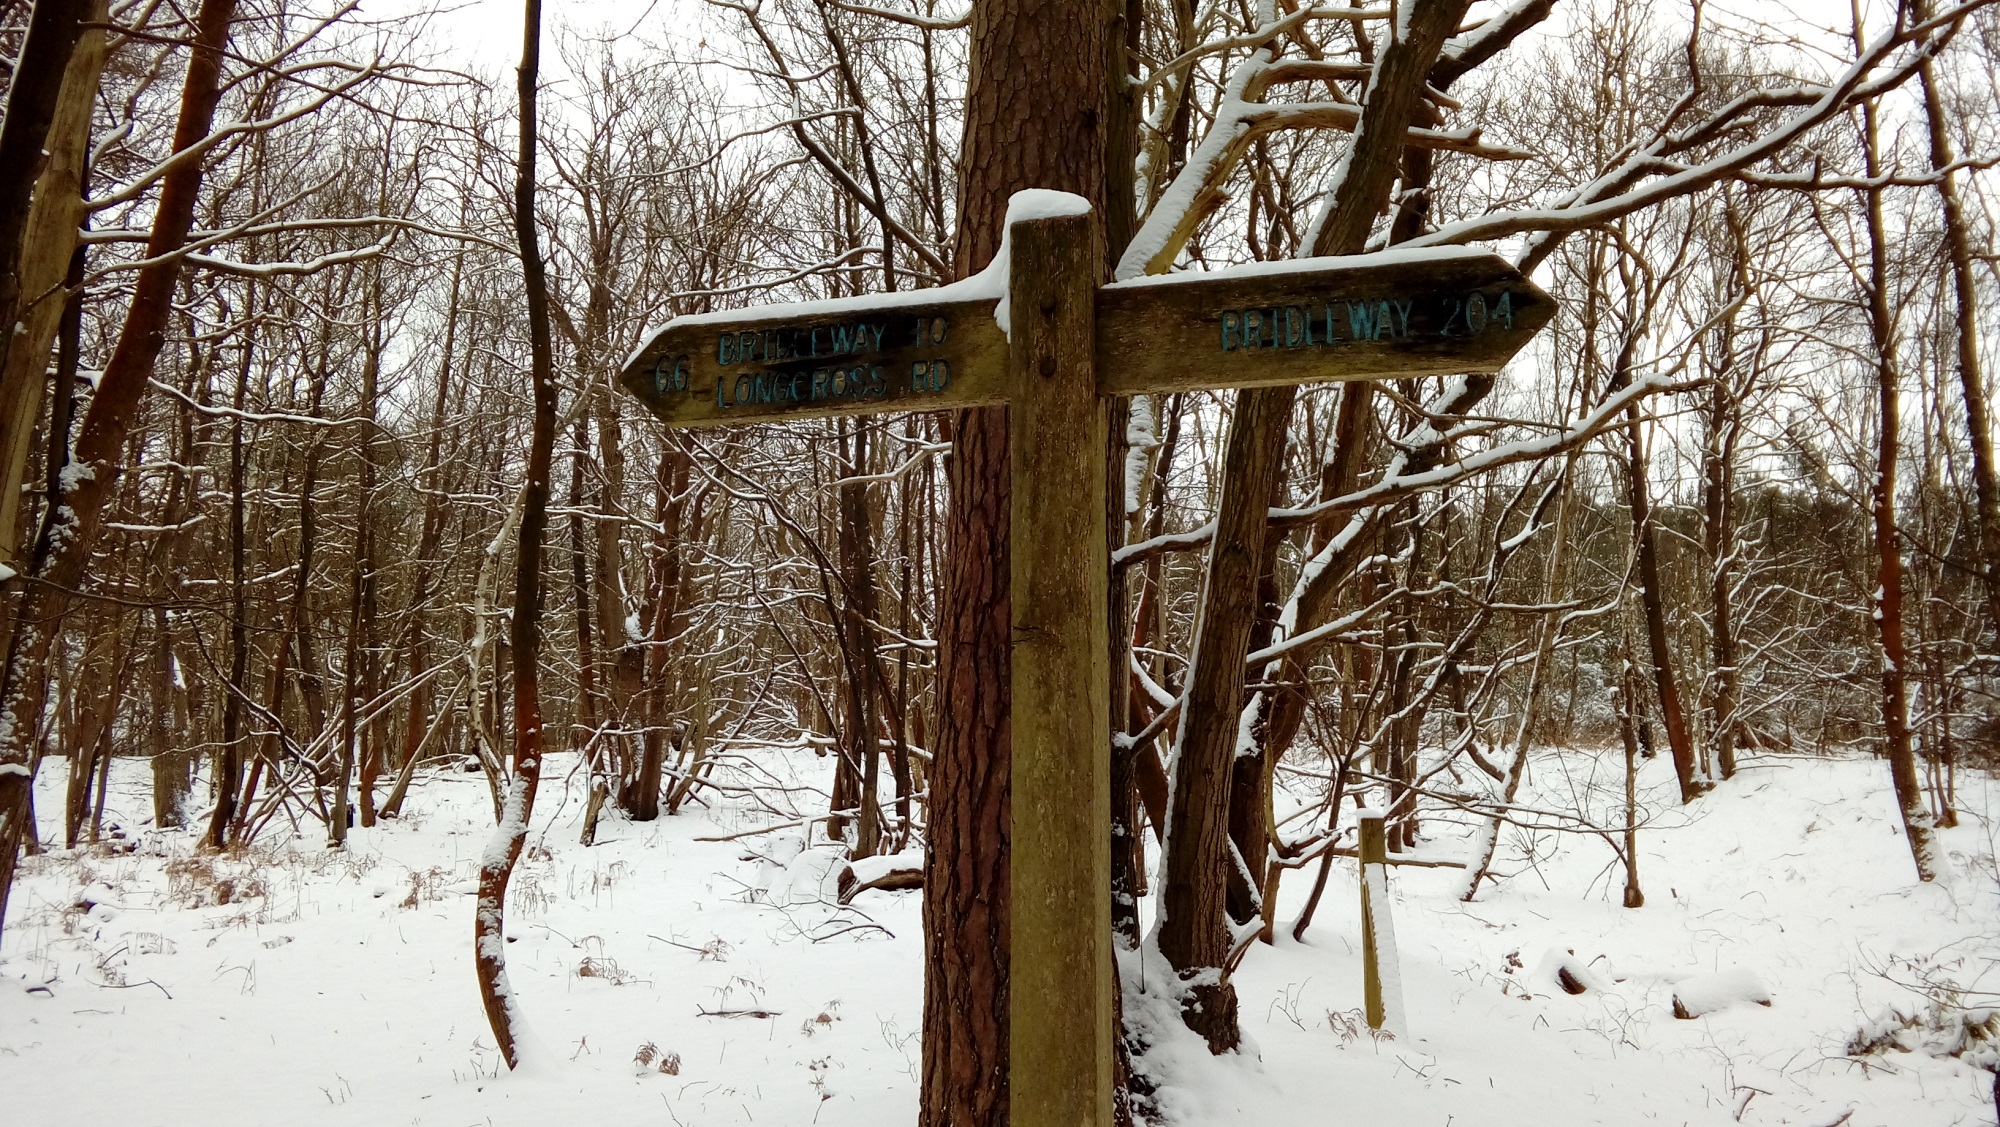 A wooden public footpath sign in a woodland area on a winters day, covered in snow.